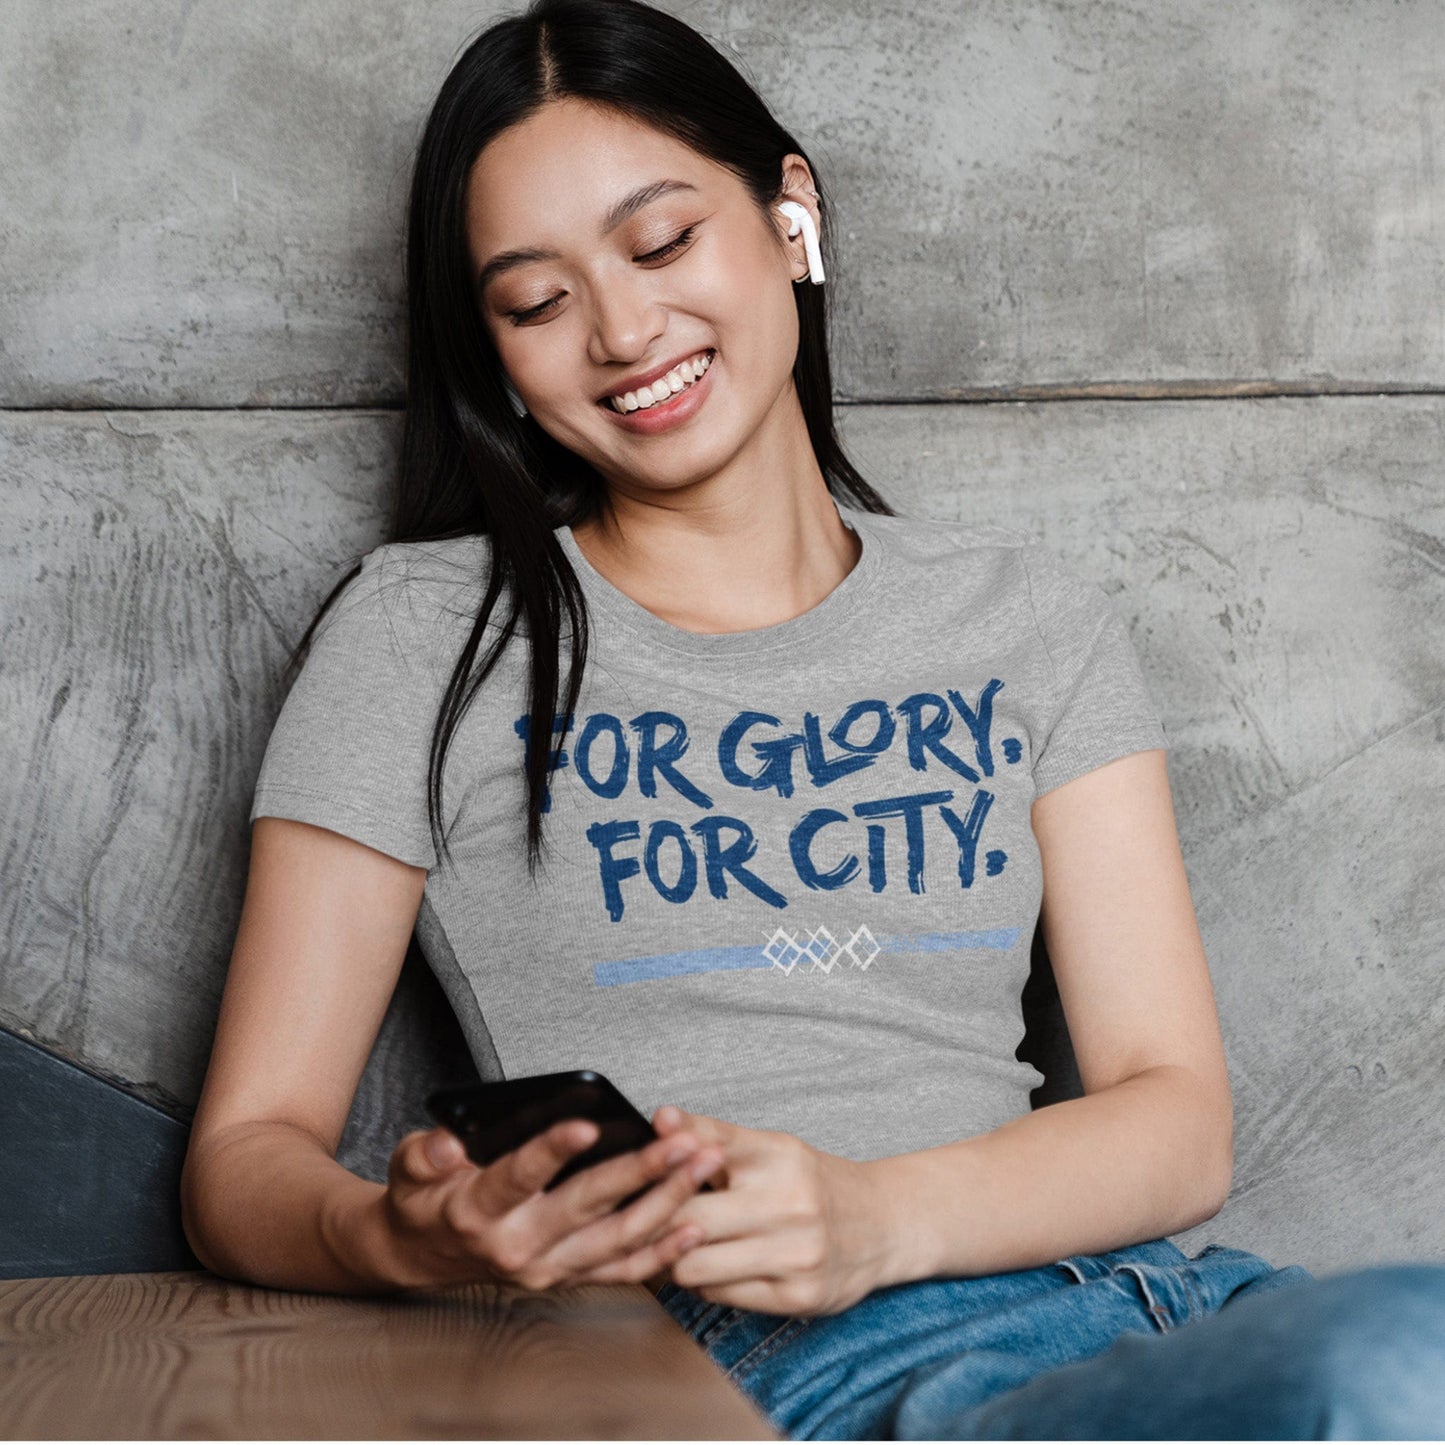 KC Swag Sporting Kansas City navy, powder, white FOR GLORY FOR CITY on athletic heather grey unisex t-shirt worn by female model sitting at table against a concrete wall